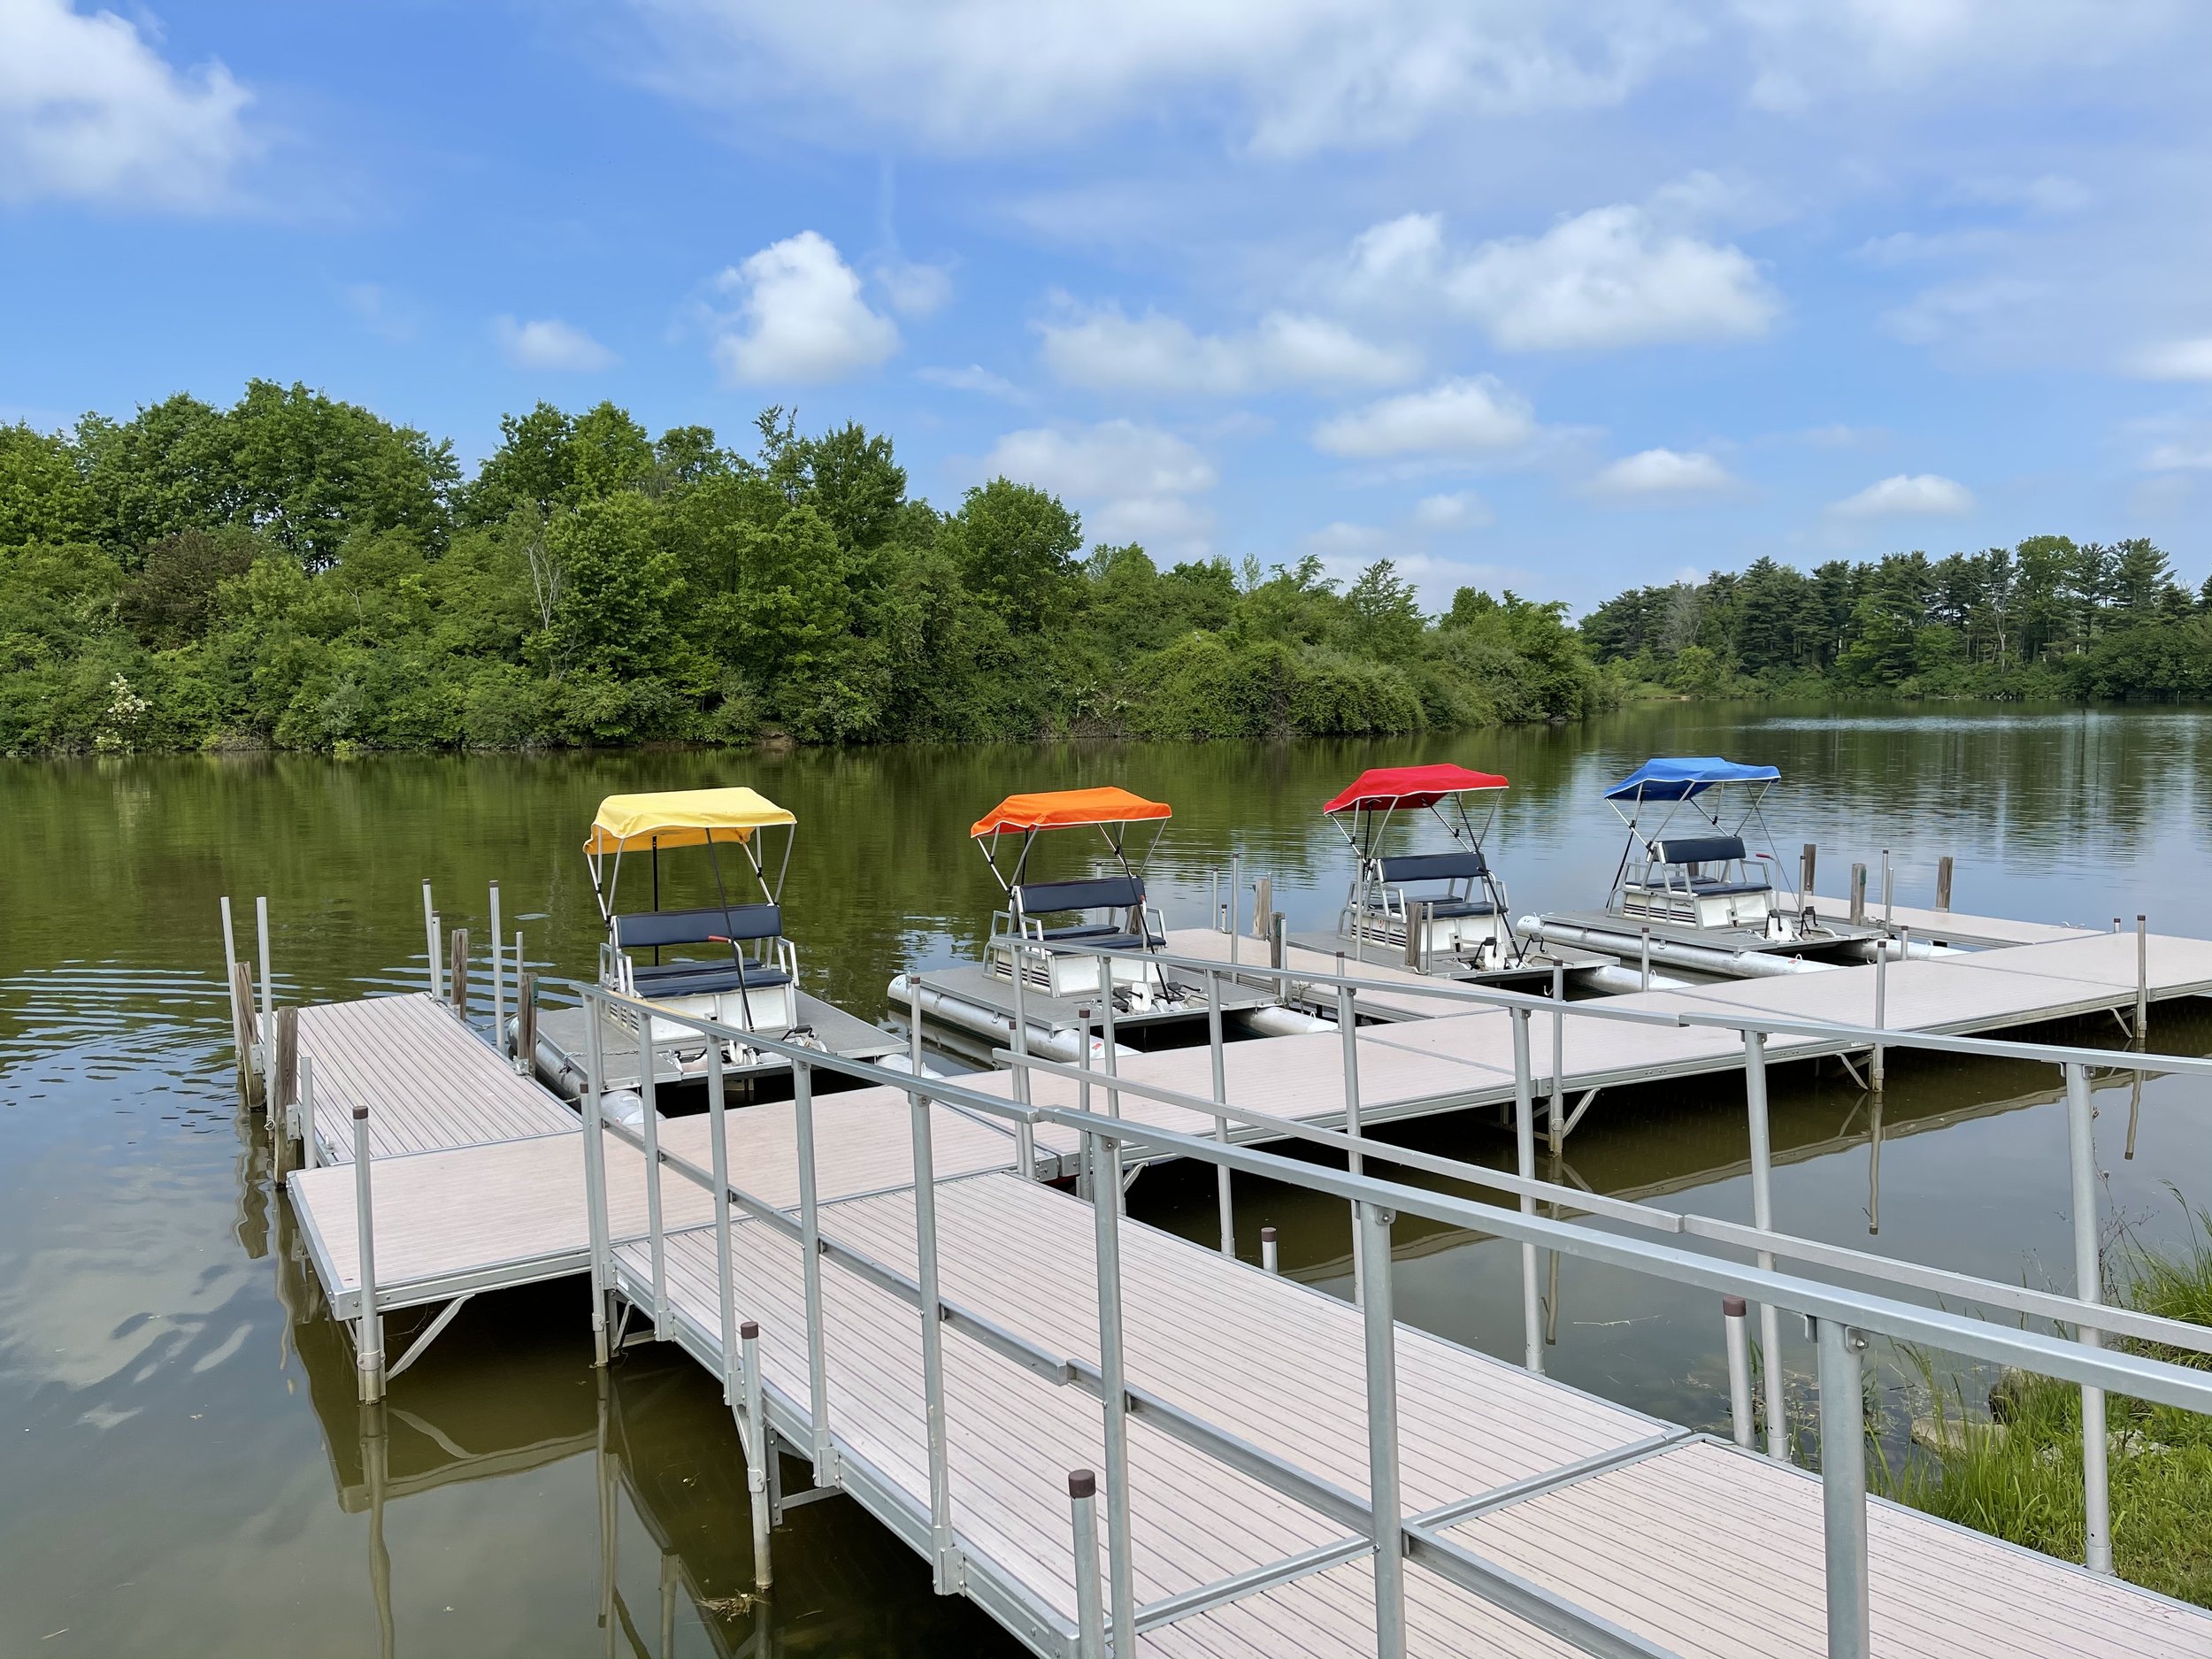 Paddleboats available to rent seasonally at Wellington Reservation